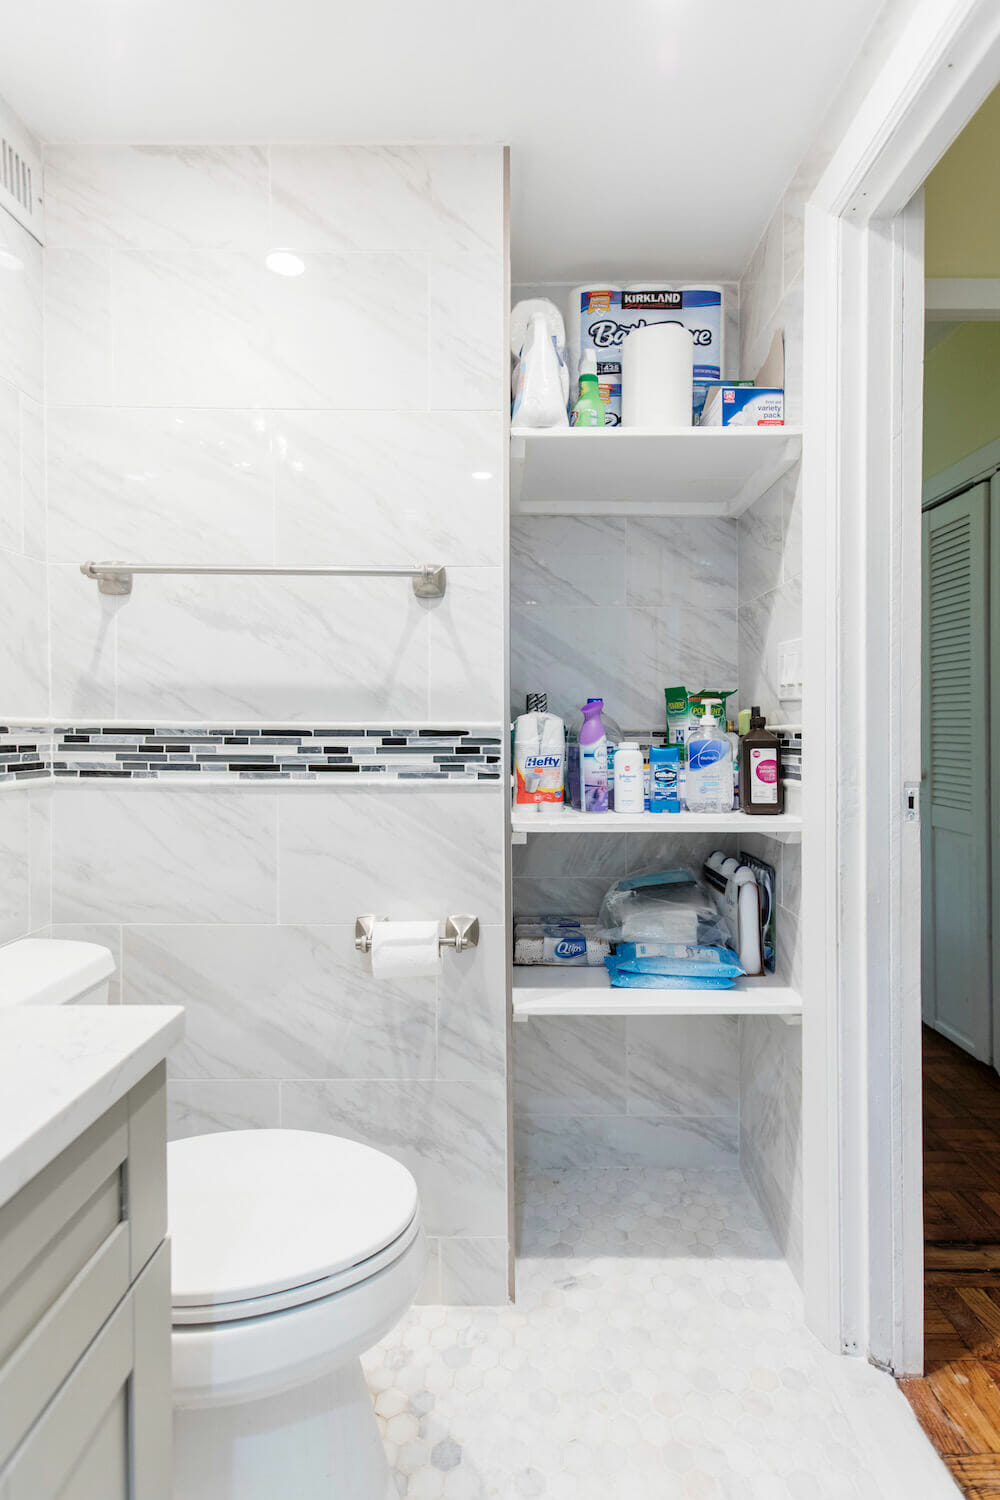 Image of a built-in bathroom storage nook with supplies